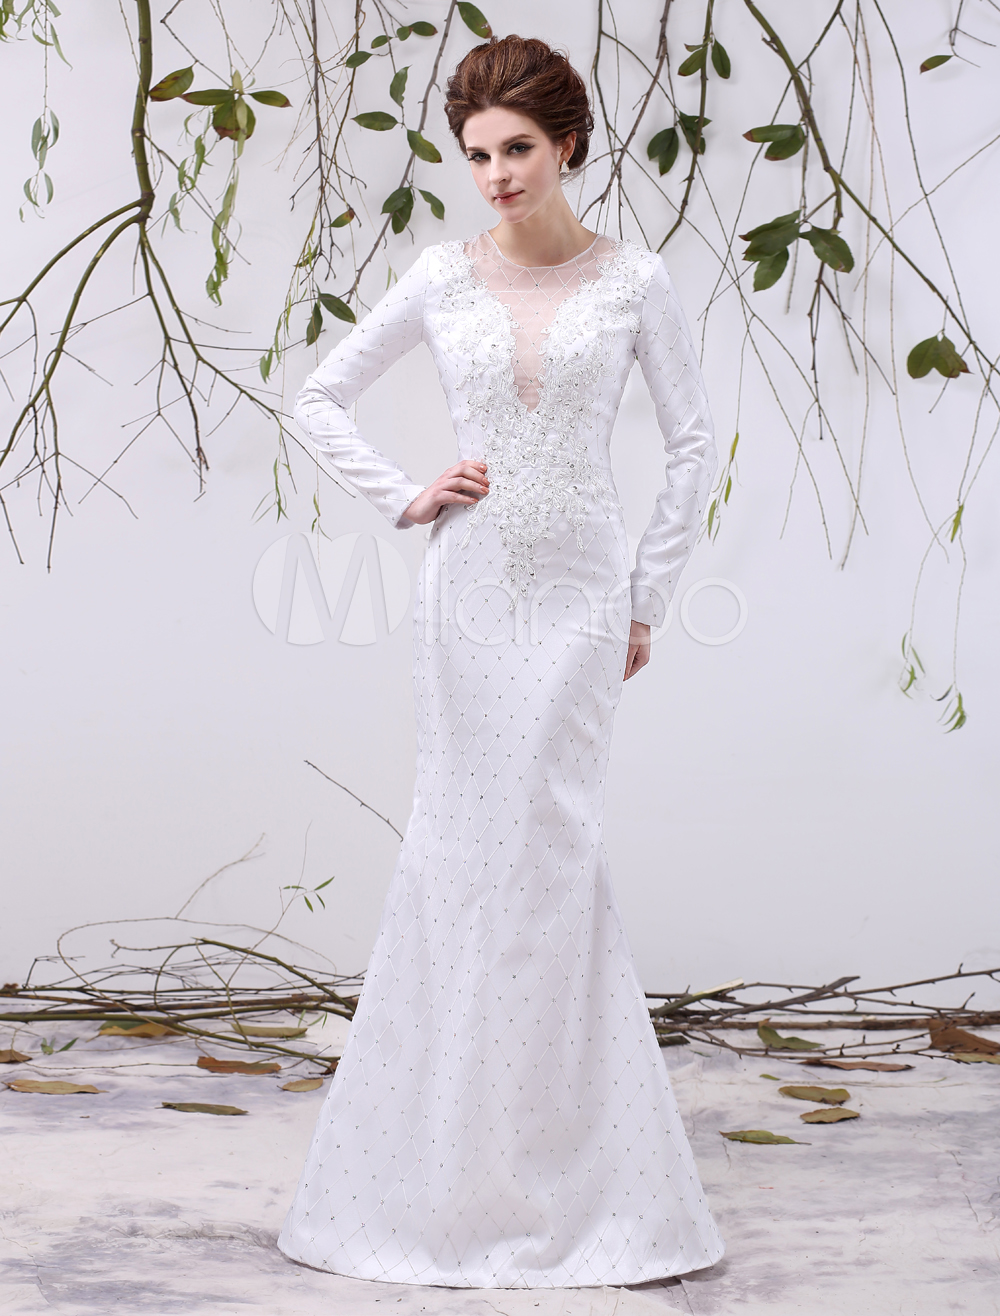 White Mermaid Jewel Neck Sequin Organza Bridal Mother Dress with Long Sleeves Milanoo (Wedding) photo